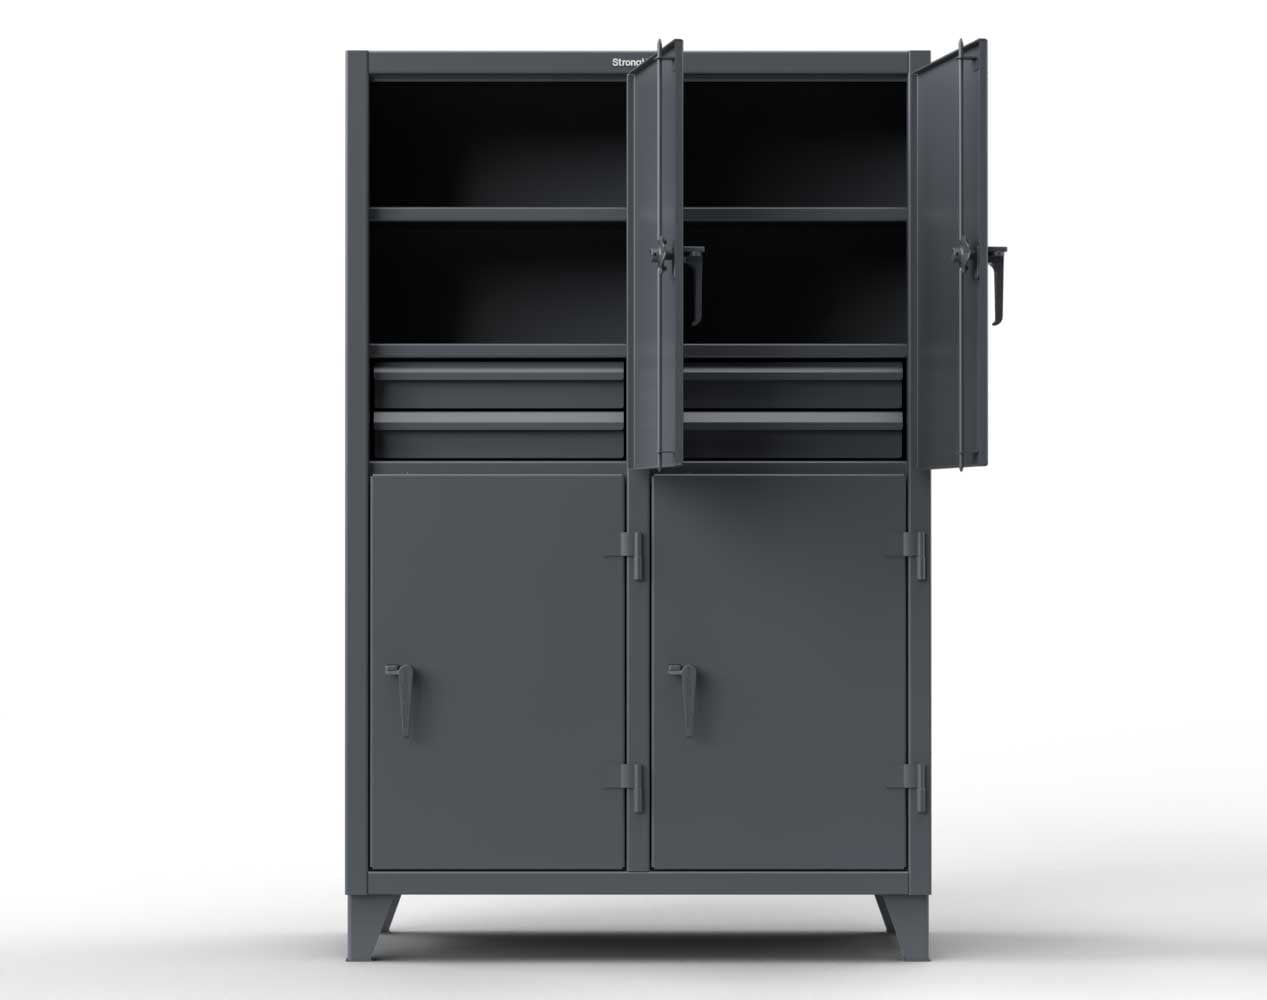 Extreme Duty 12 GA Double-Tier Locker with 10 Compartments, 15 Shelves, 20 Drawers - 122 in. W x 24in. D x 78 in. H